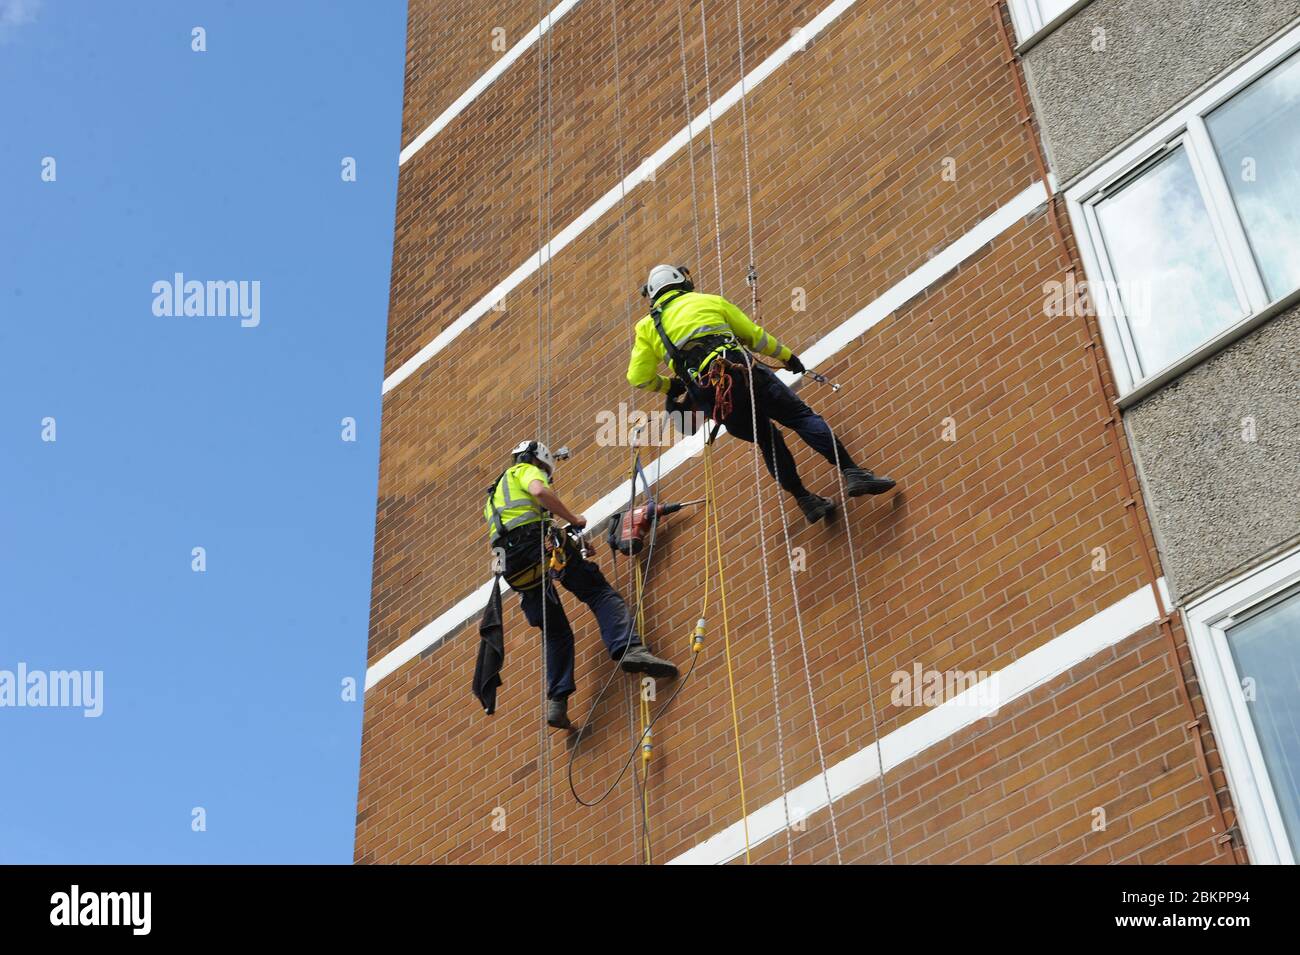 Men working at height on ropes. Industrial rope access workers on the wall of a high residential block of flats. They are wearing professional safety Stock Photo